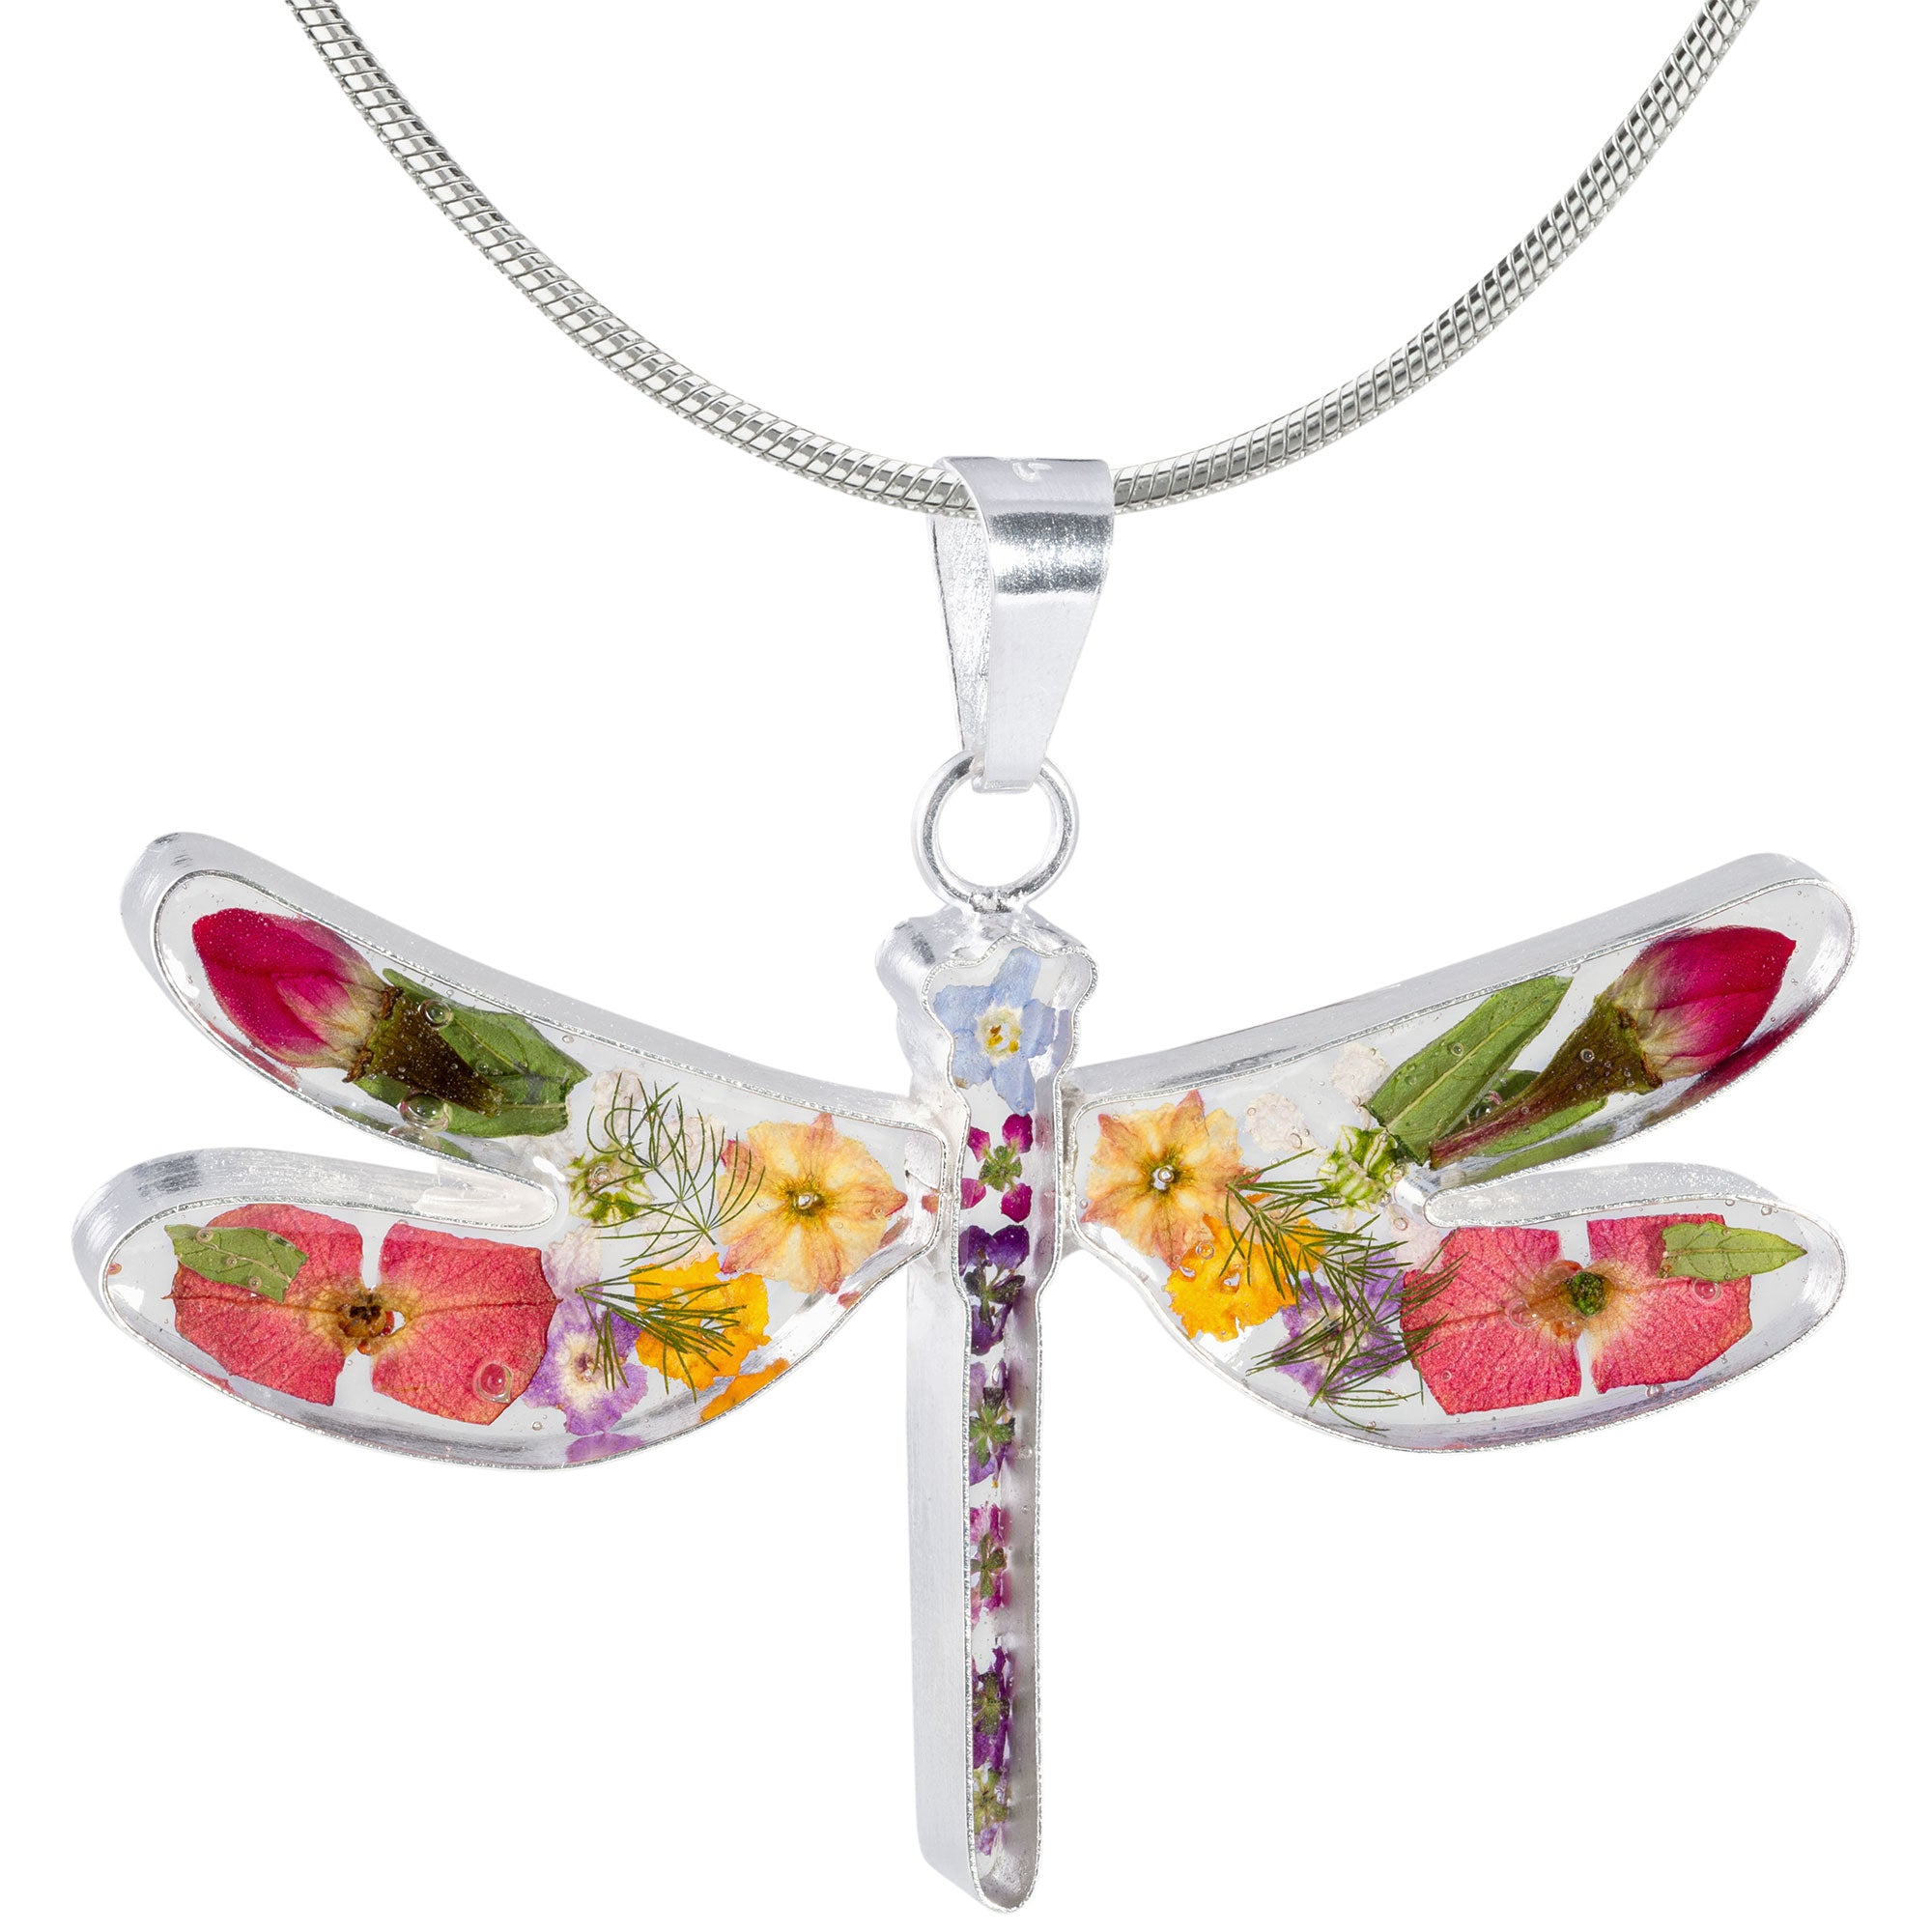 Real Flowers & Sterling Dragonfly Necklace - With Sterling Cable Chain